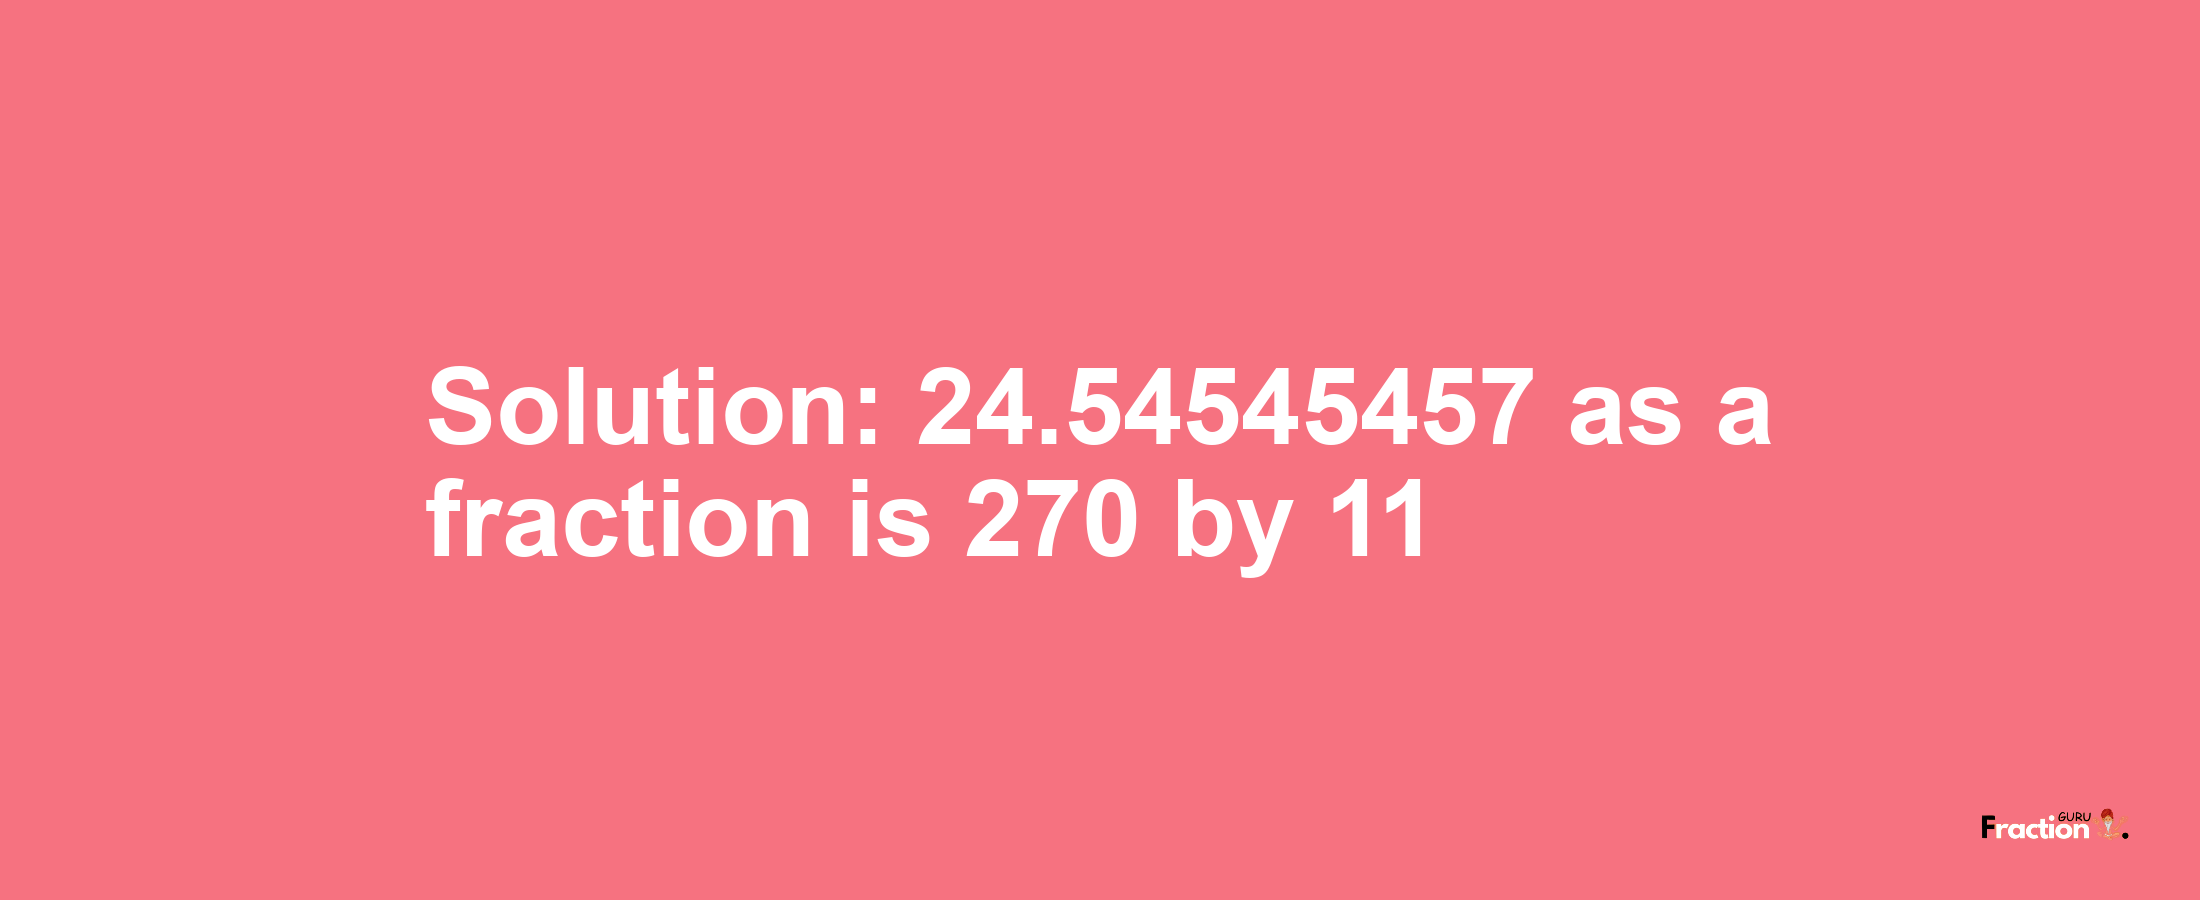 Solution:24.54545457 as a fraction is 270/11